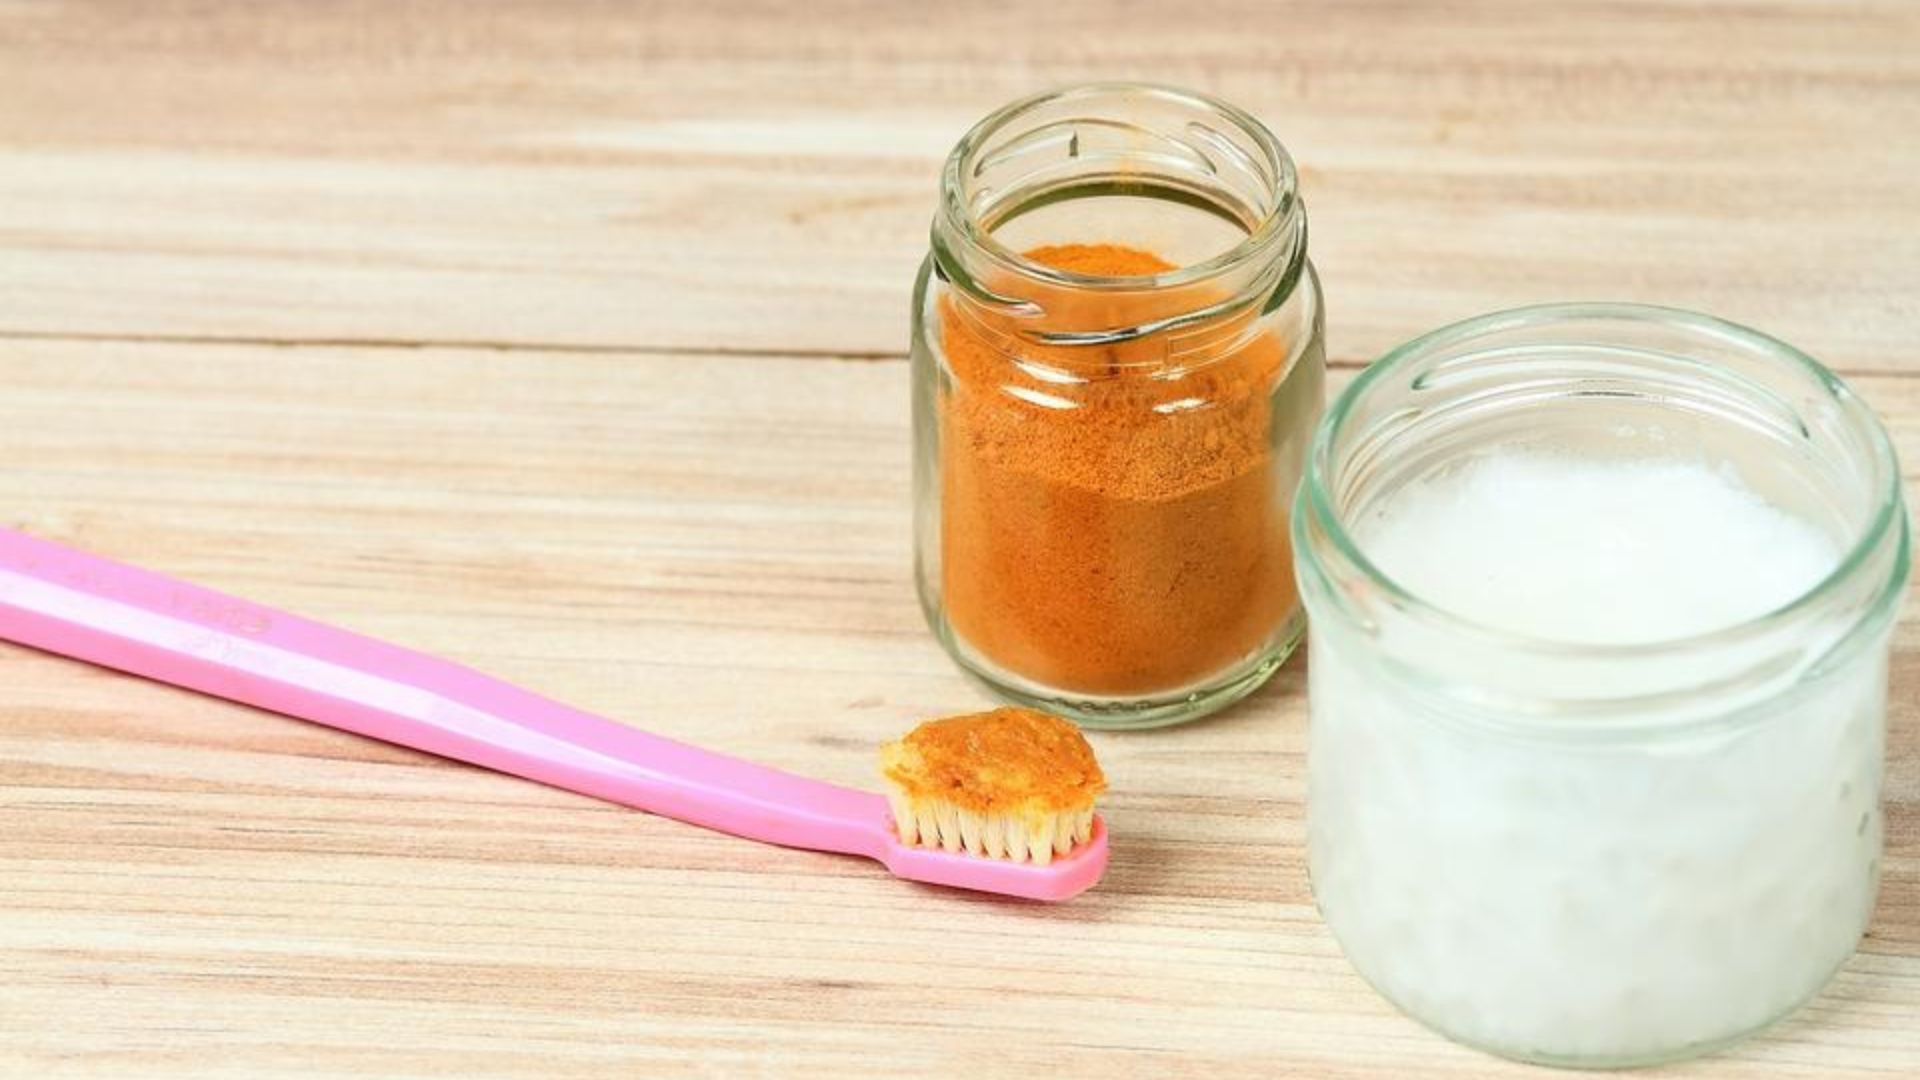 Homemade Turmeric And Coconut Oil Whitening Toothpast